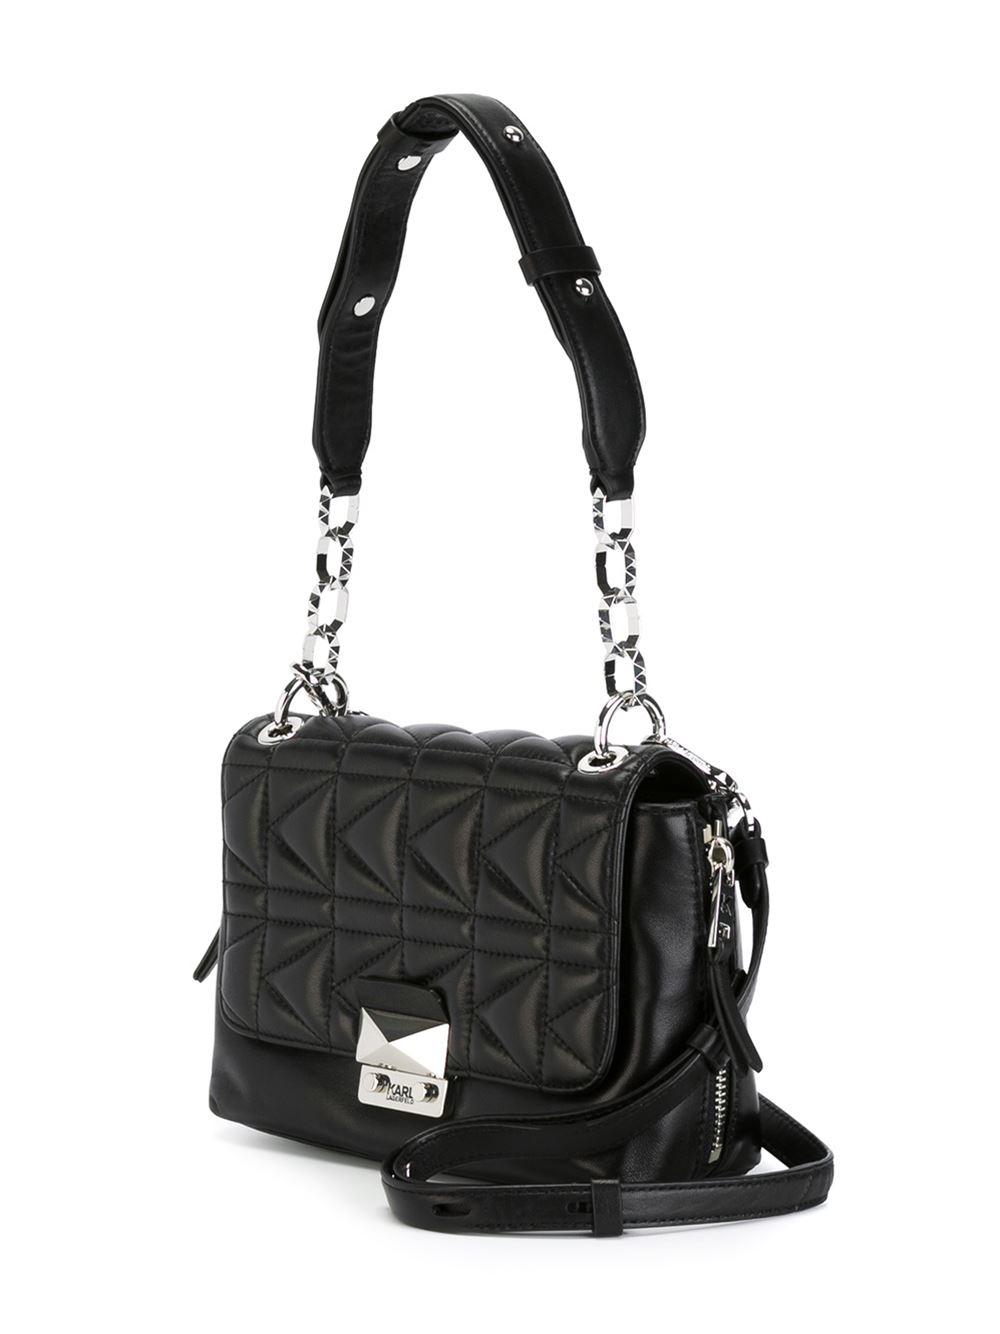 Karl Lagerfeld Quilted Crossbody Bag in Black - Lyst